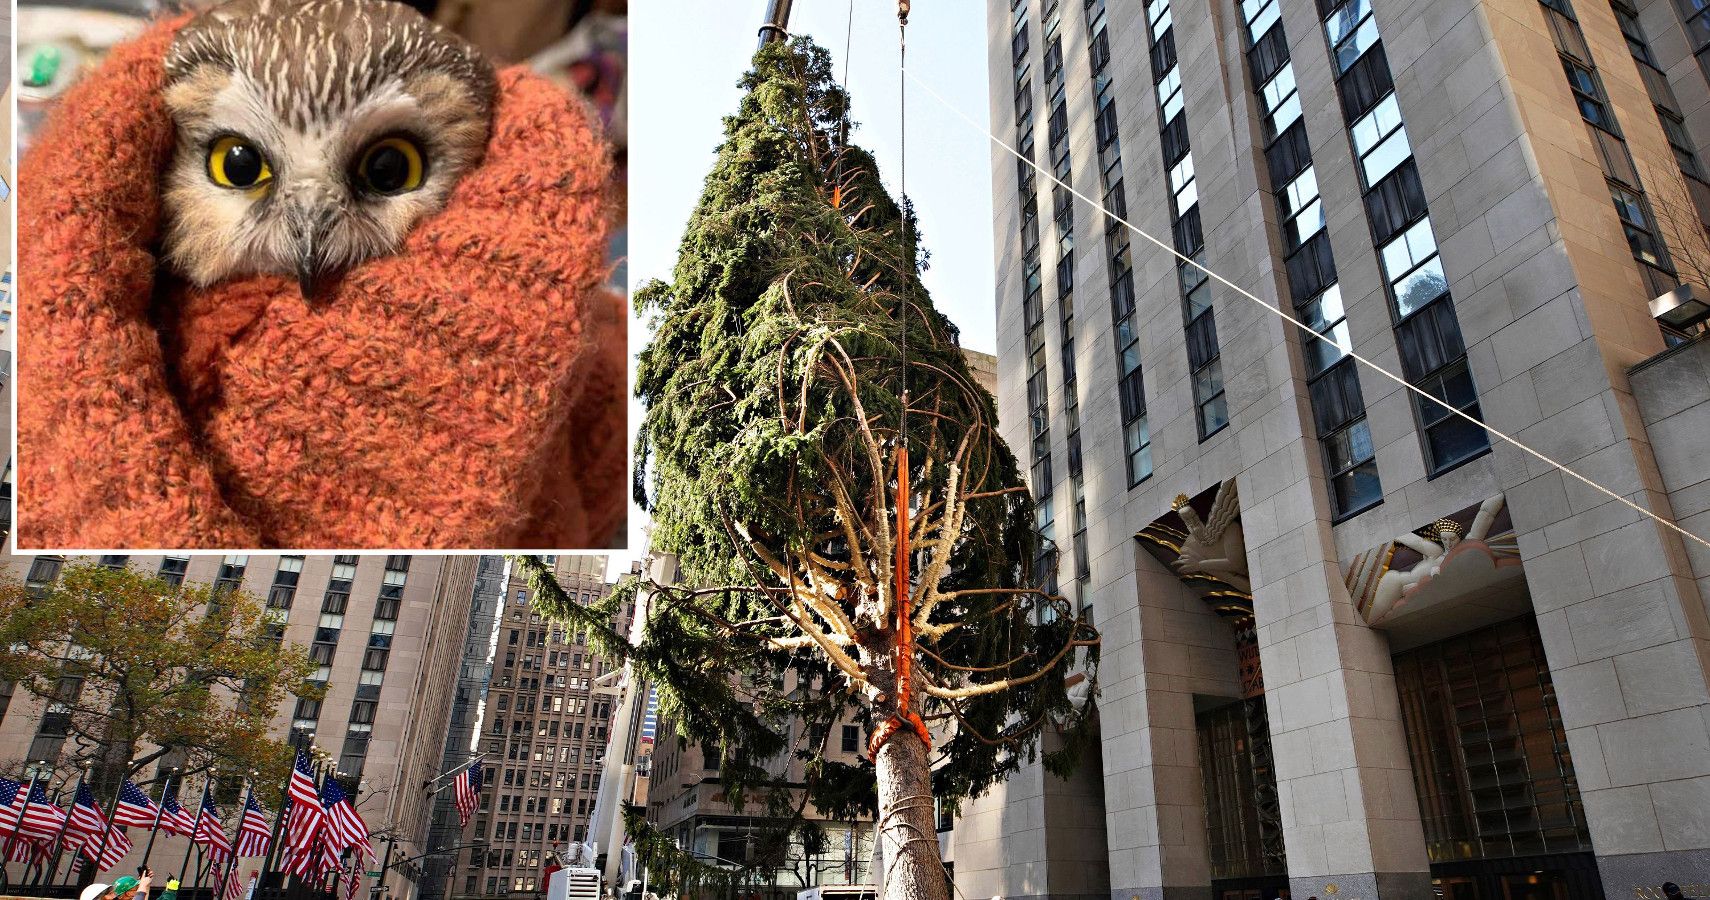 The Rockefeller Plaza Christmas Tree Was Giving Us Charlie Brown Vibe Until An Owl Appeared